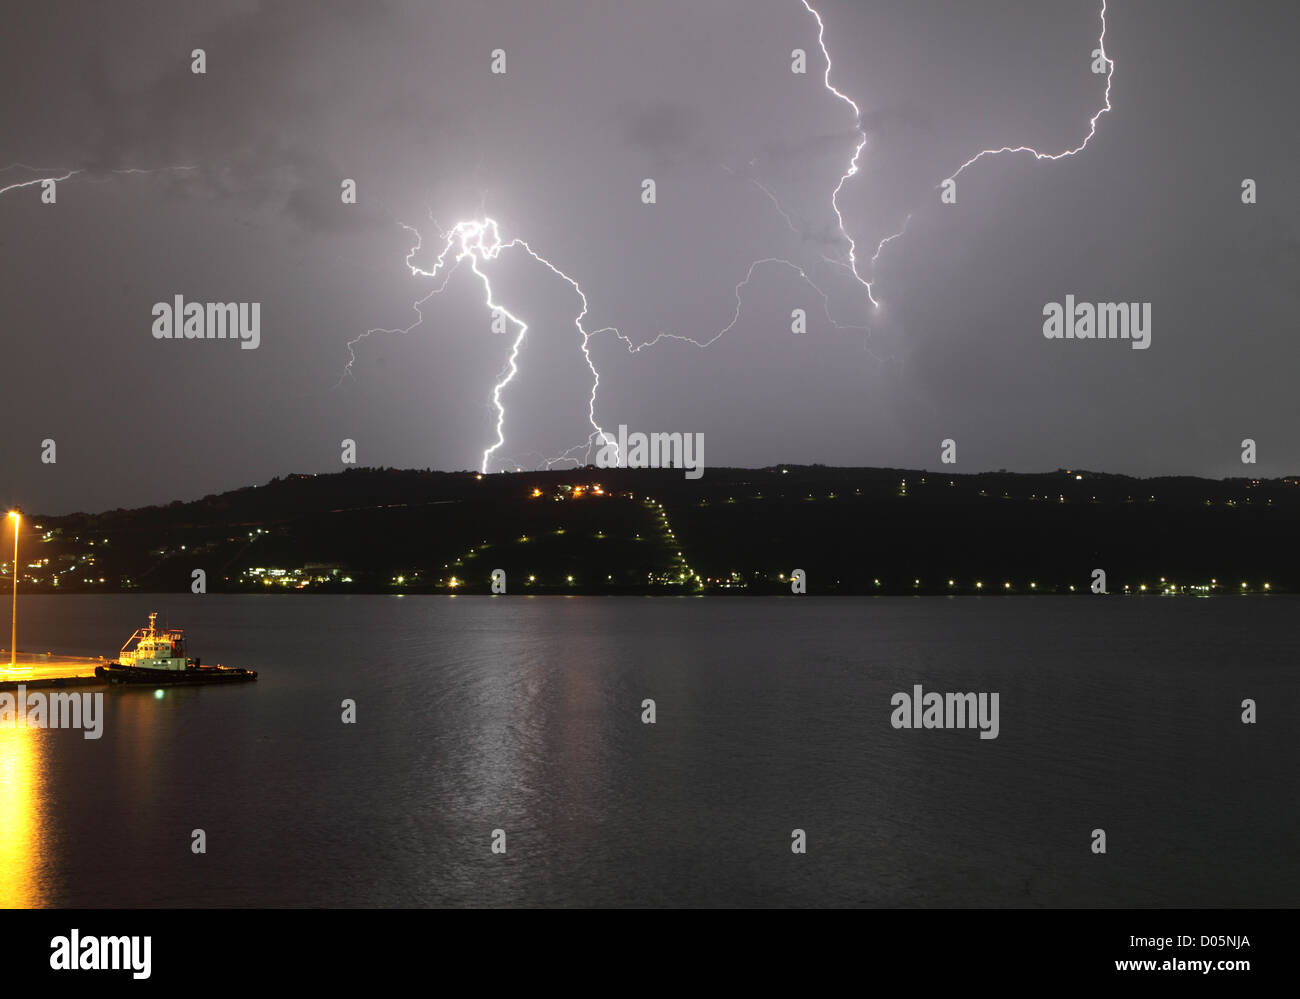 Flashes of lightning light up the sky over Akrotiri, during a ferocious early winter thunderstorm over Souda Bay, Crete, Greece Stock Photo